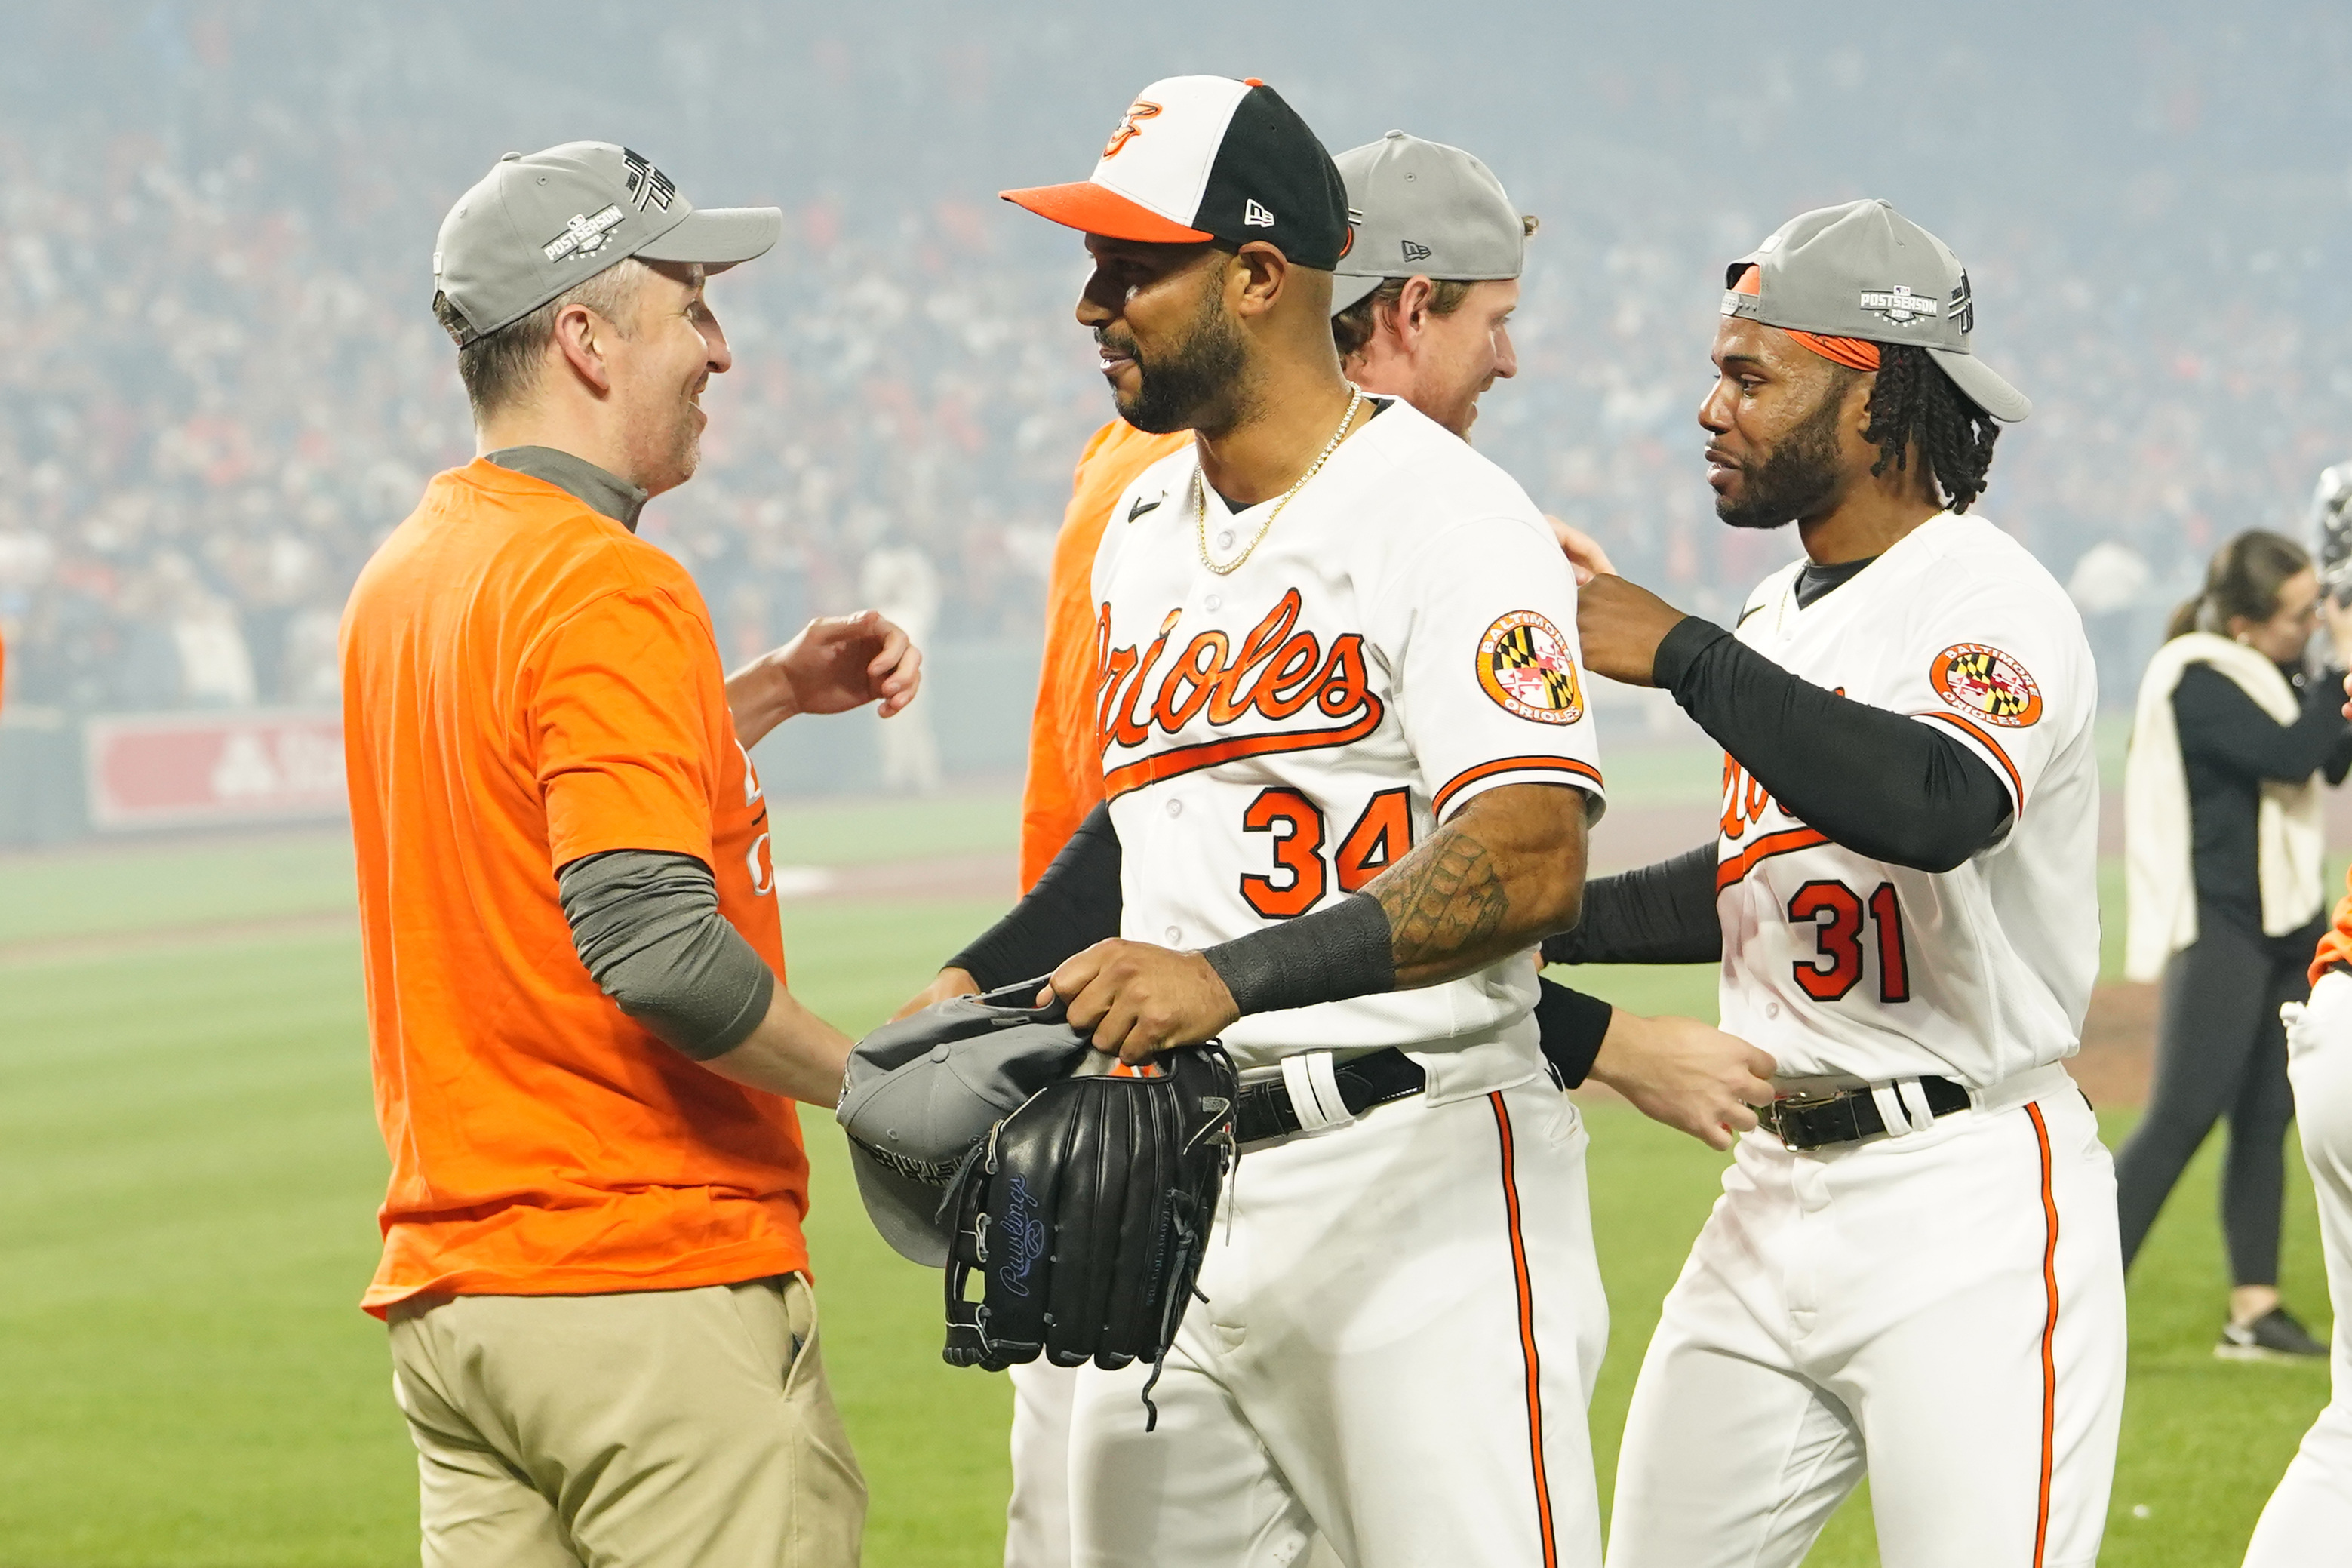 AL East-leading Orioles rout Mets 10-3 in Showalter's return to Camden  Yards - The San Diego Union-Tribune